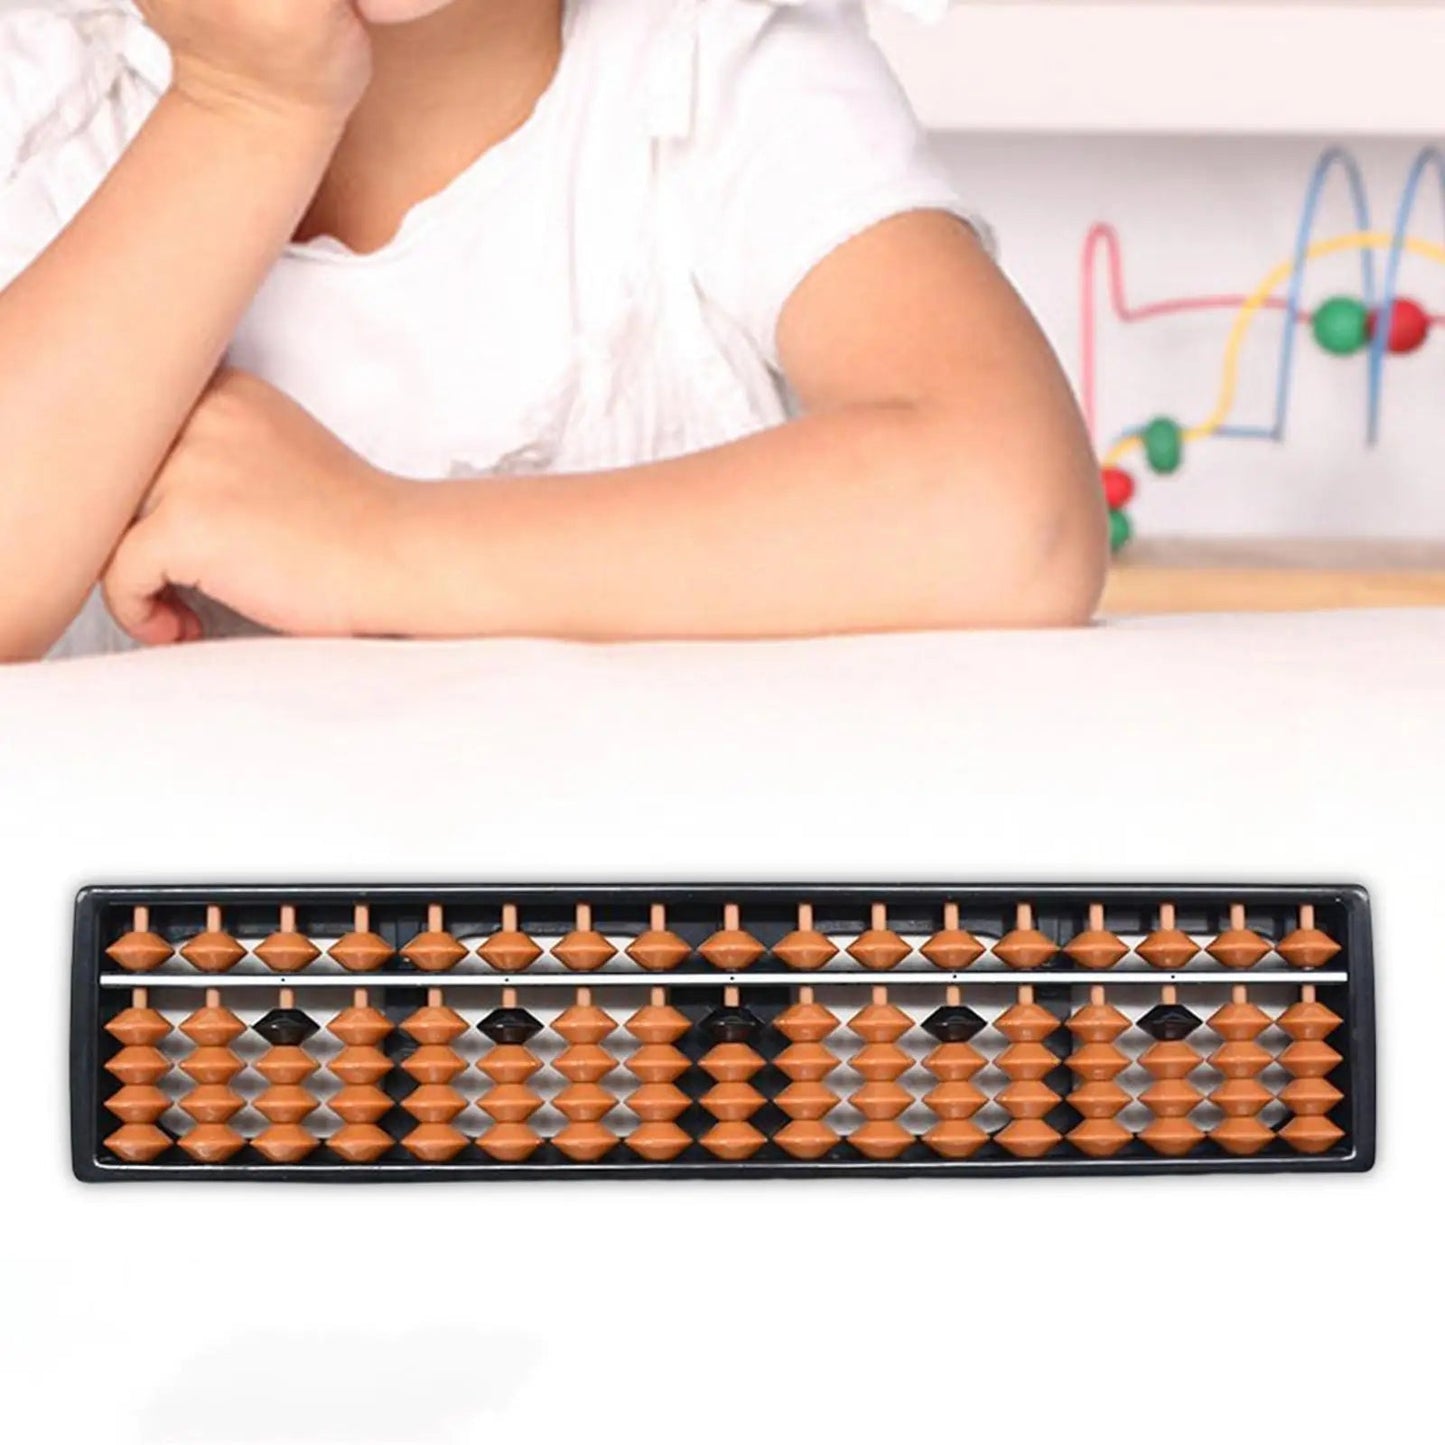 Professional Wooden Abacus with 17 Digits - Educational Counting Tool - ToylandEU